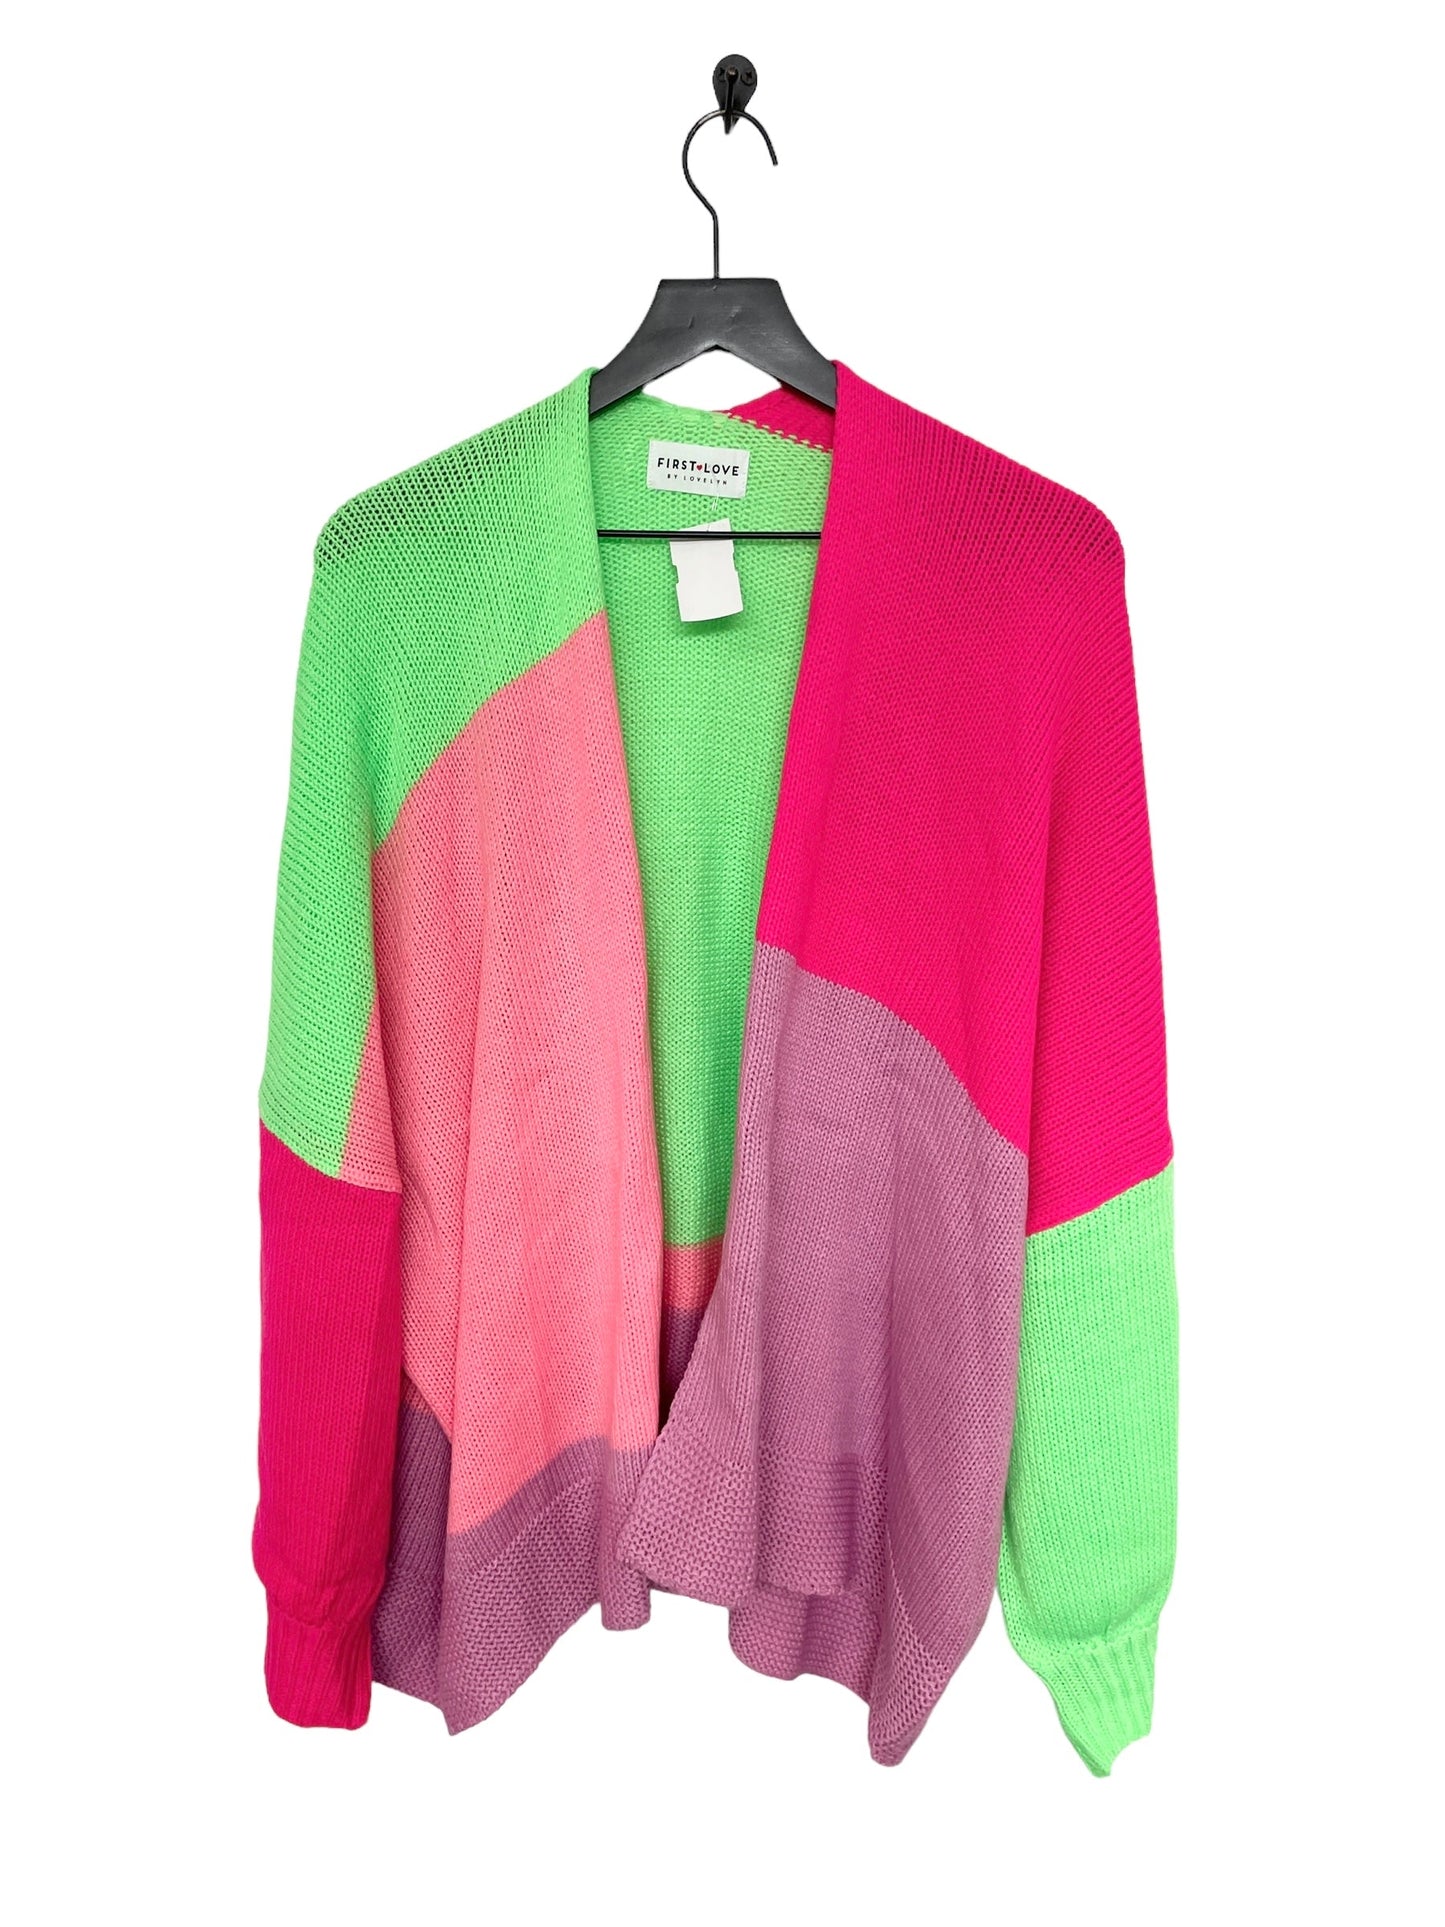 Multi-colored Sweater Cardigan First Love, Size 3x